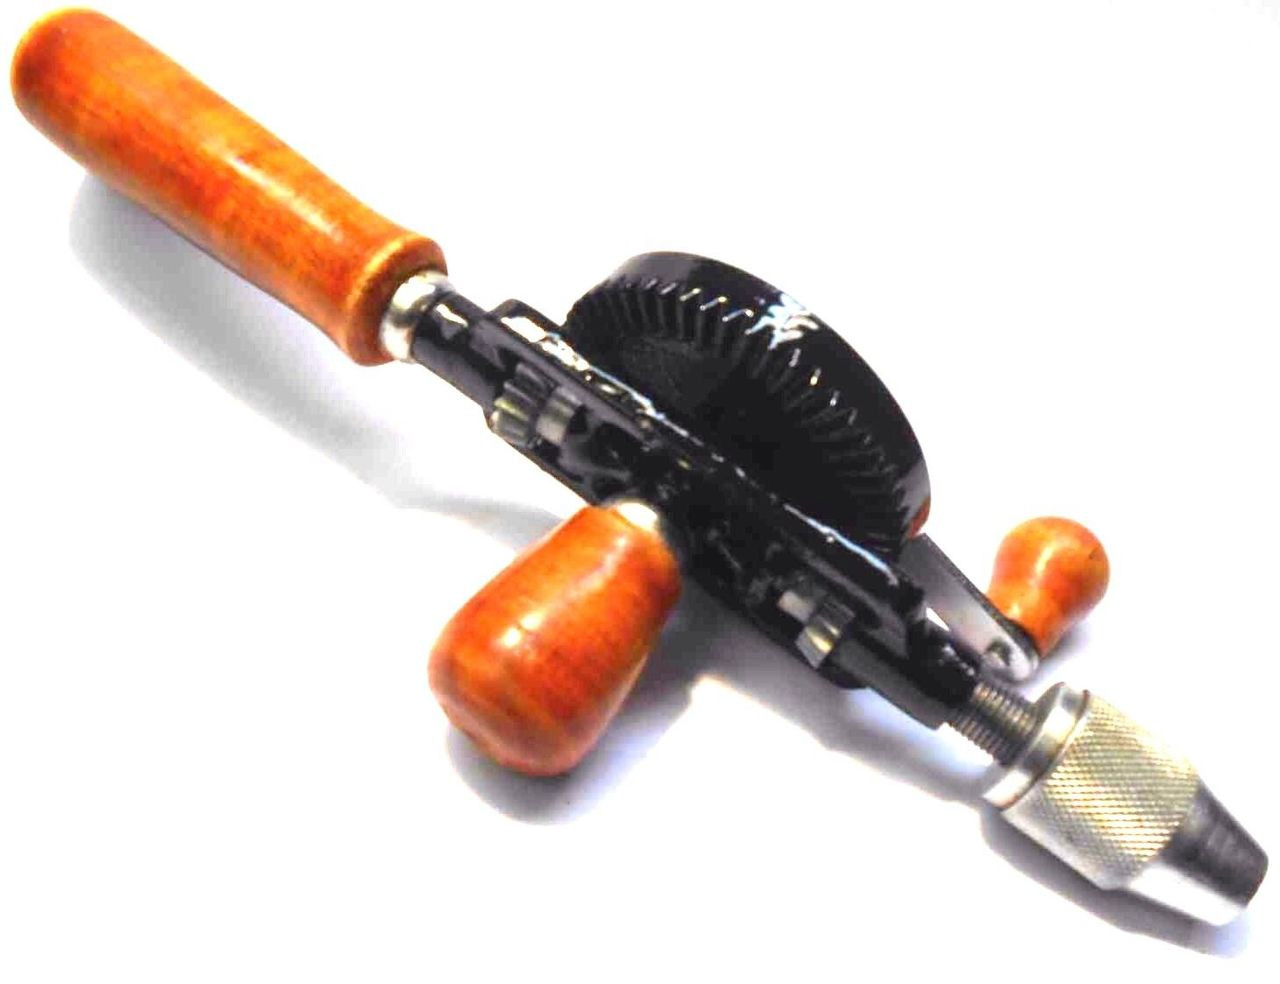 NEW 8mm Hand Drill Woodworking, Hobby, Carpentry Etc Toolzone WW114